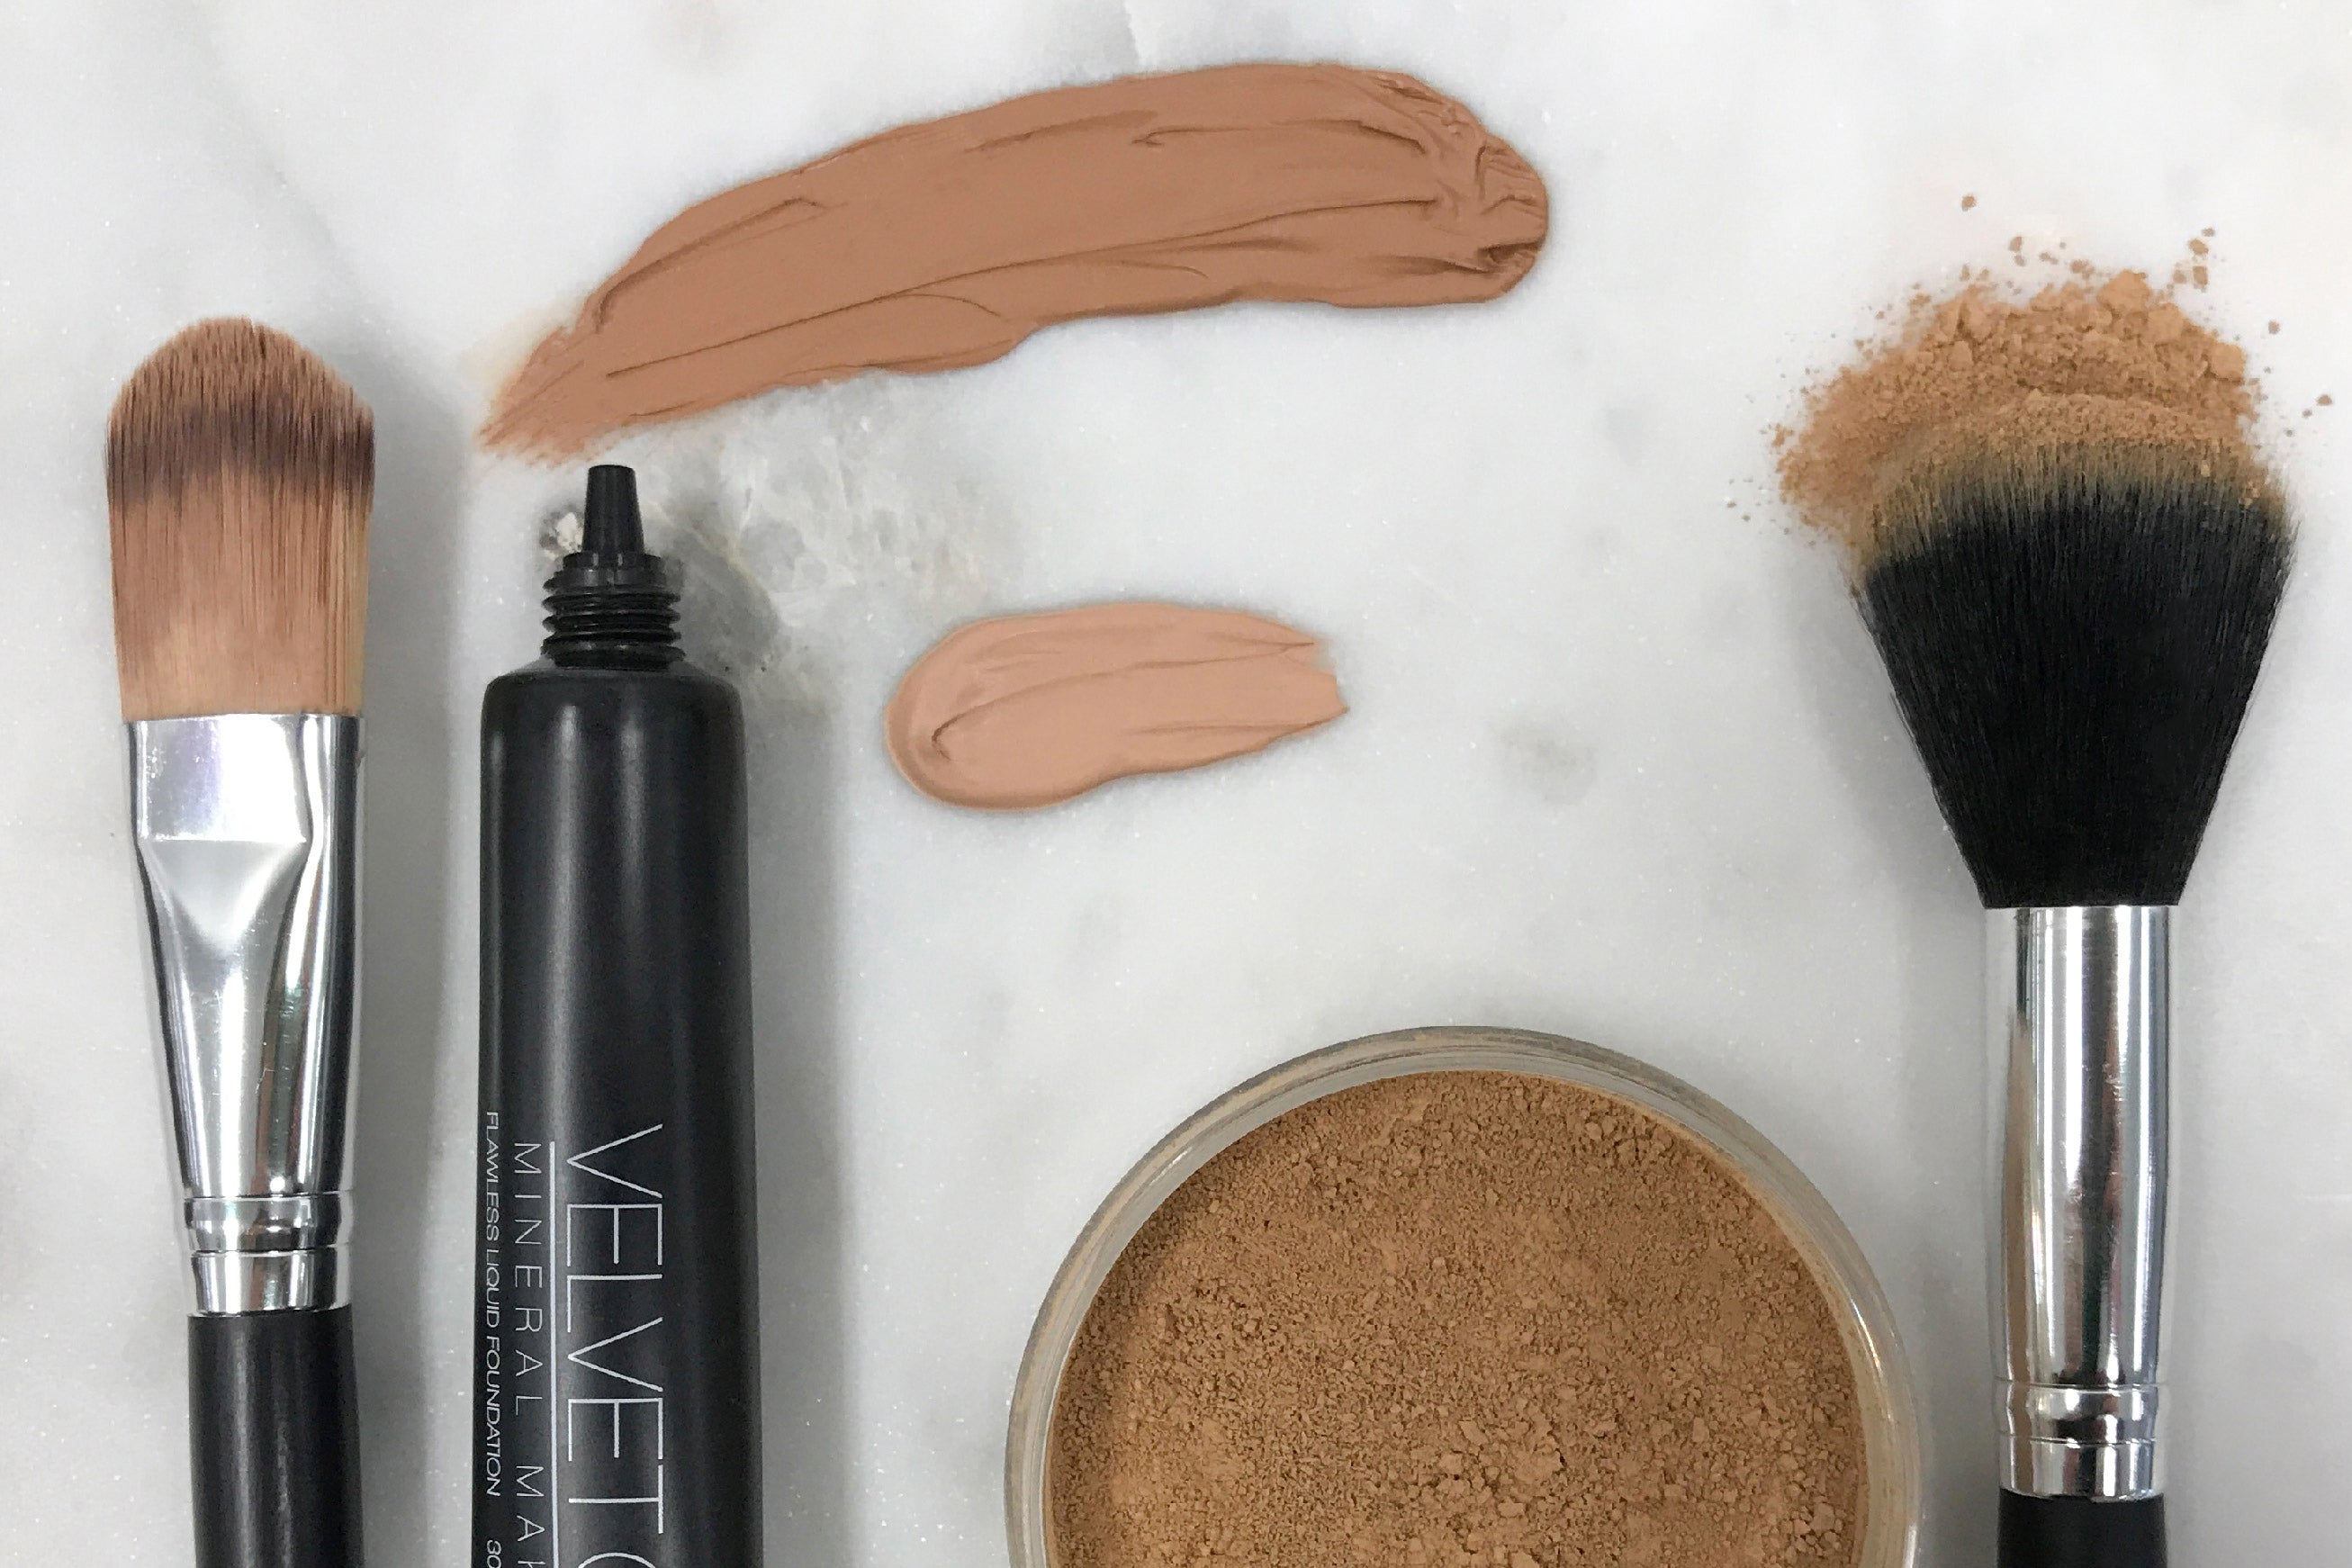 Long lasting buildable coverage with Mineral Makeup! By Velvet Co